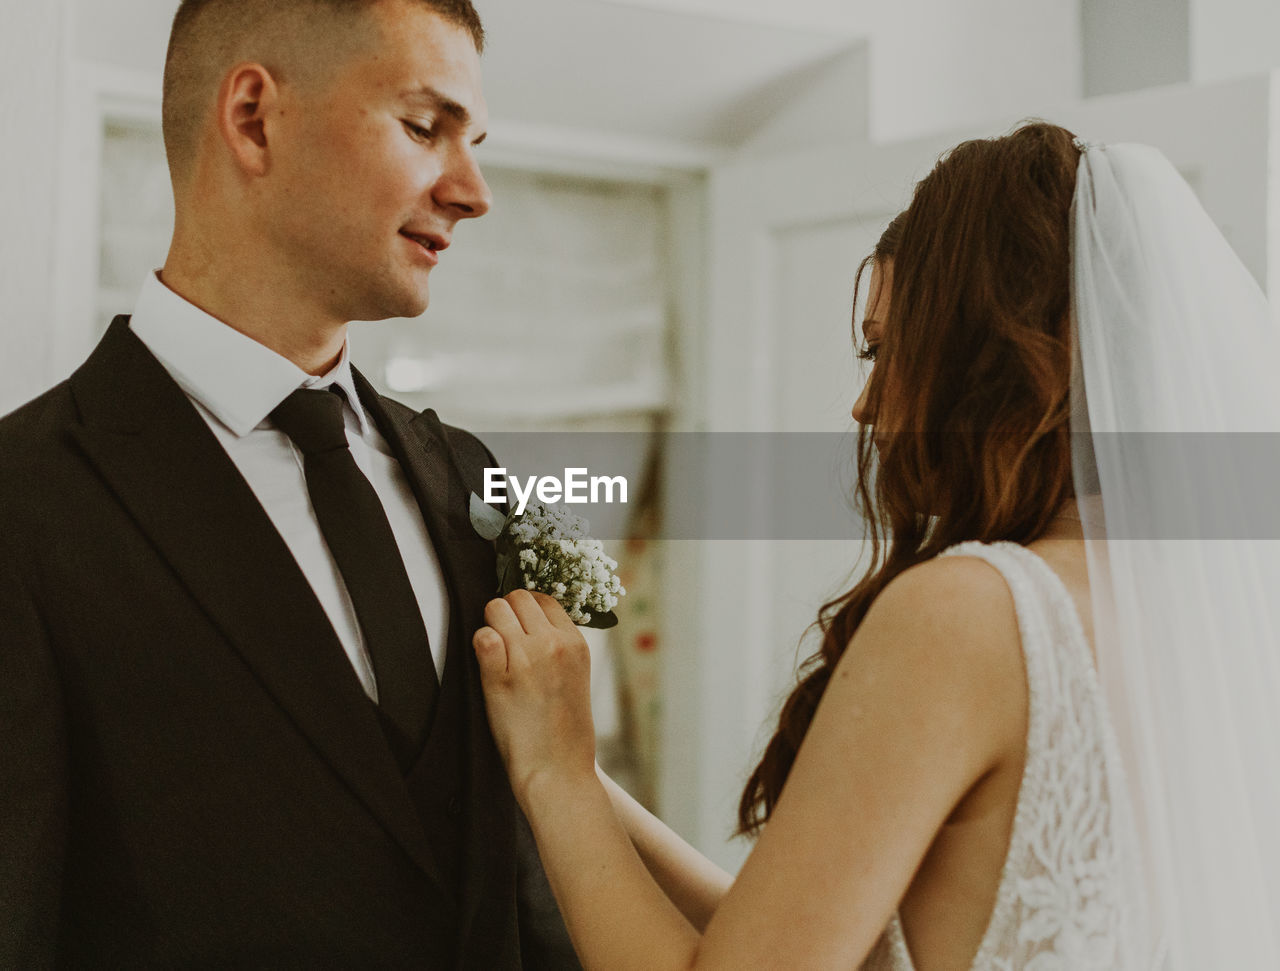 A beautiful bride inserts a bouquet of boutonnieres into the groom's jacket pocket.